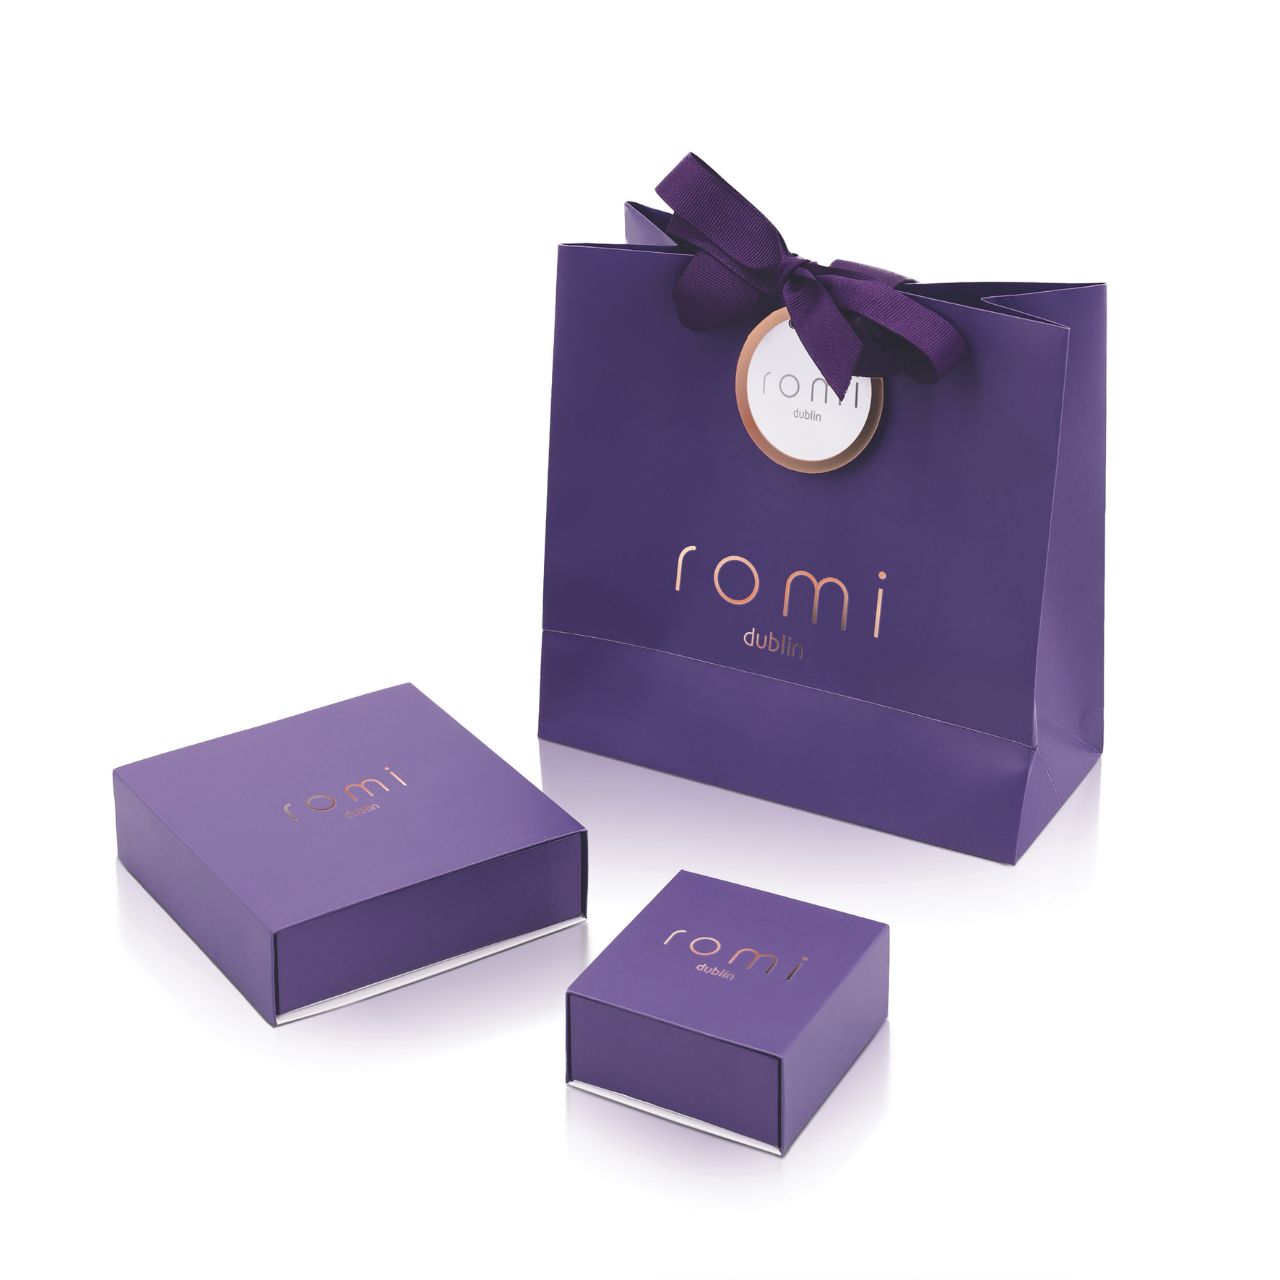 Romi Dublin Silver Knot Drop Earrings  This easy-to-wear jewellery collection was inspired by daughter Romi who loves to style and accessorise. An outfit isn’t complete until the perfect pieces of jewellery and accessories have been selected to enhance it.